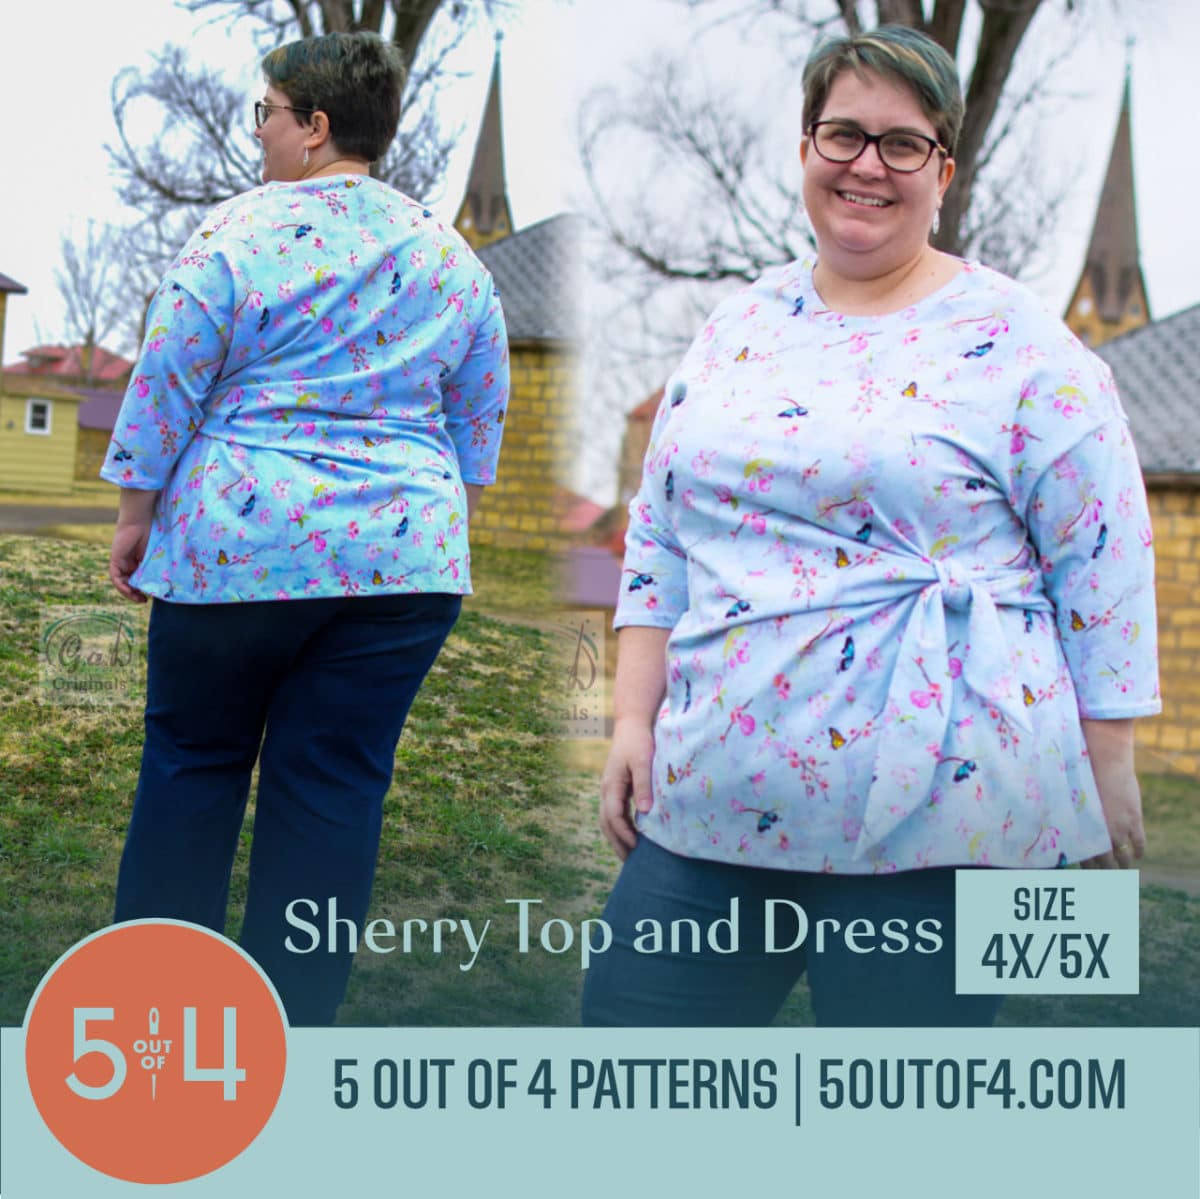 Sherry Top and Dress - 5 out of 4 Patterns